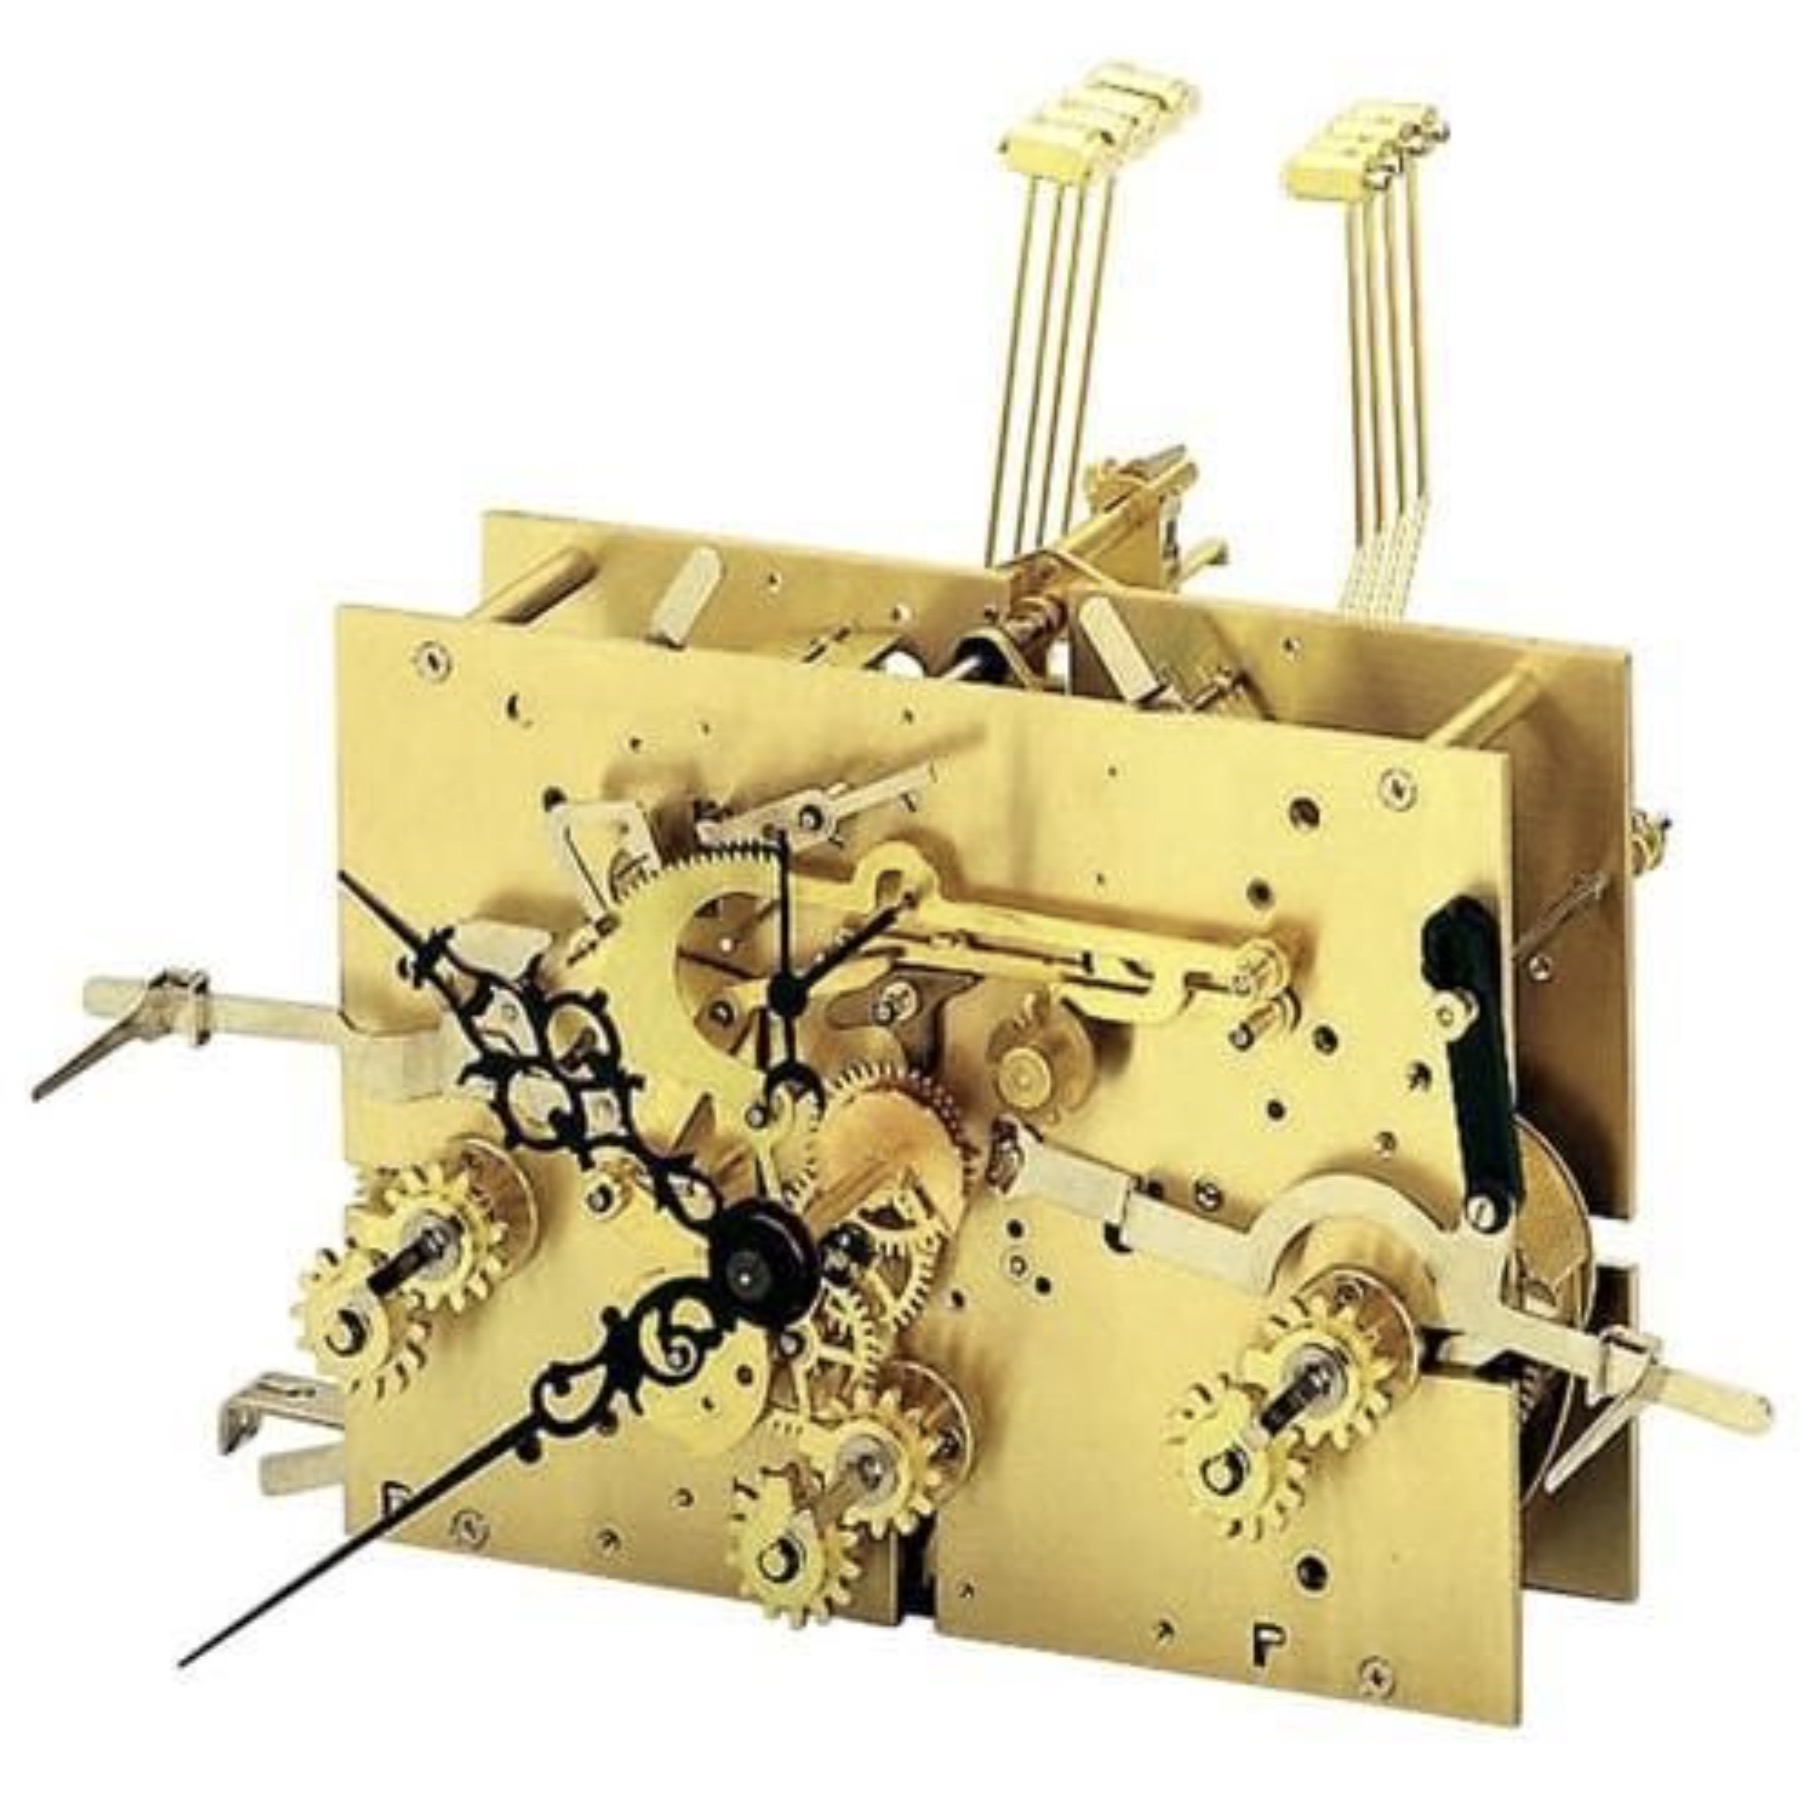 A chiming movement has a third power source, set of gears, and a larger set of hammers in the back
